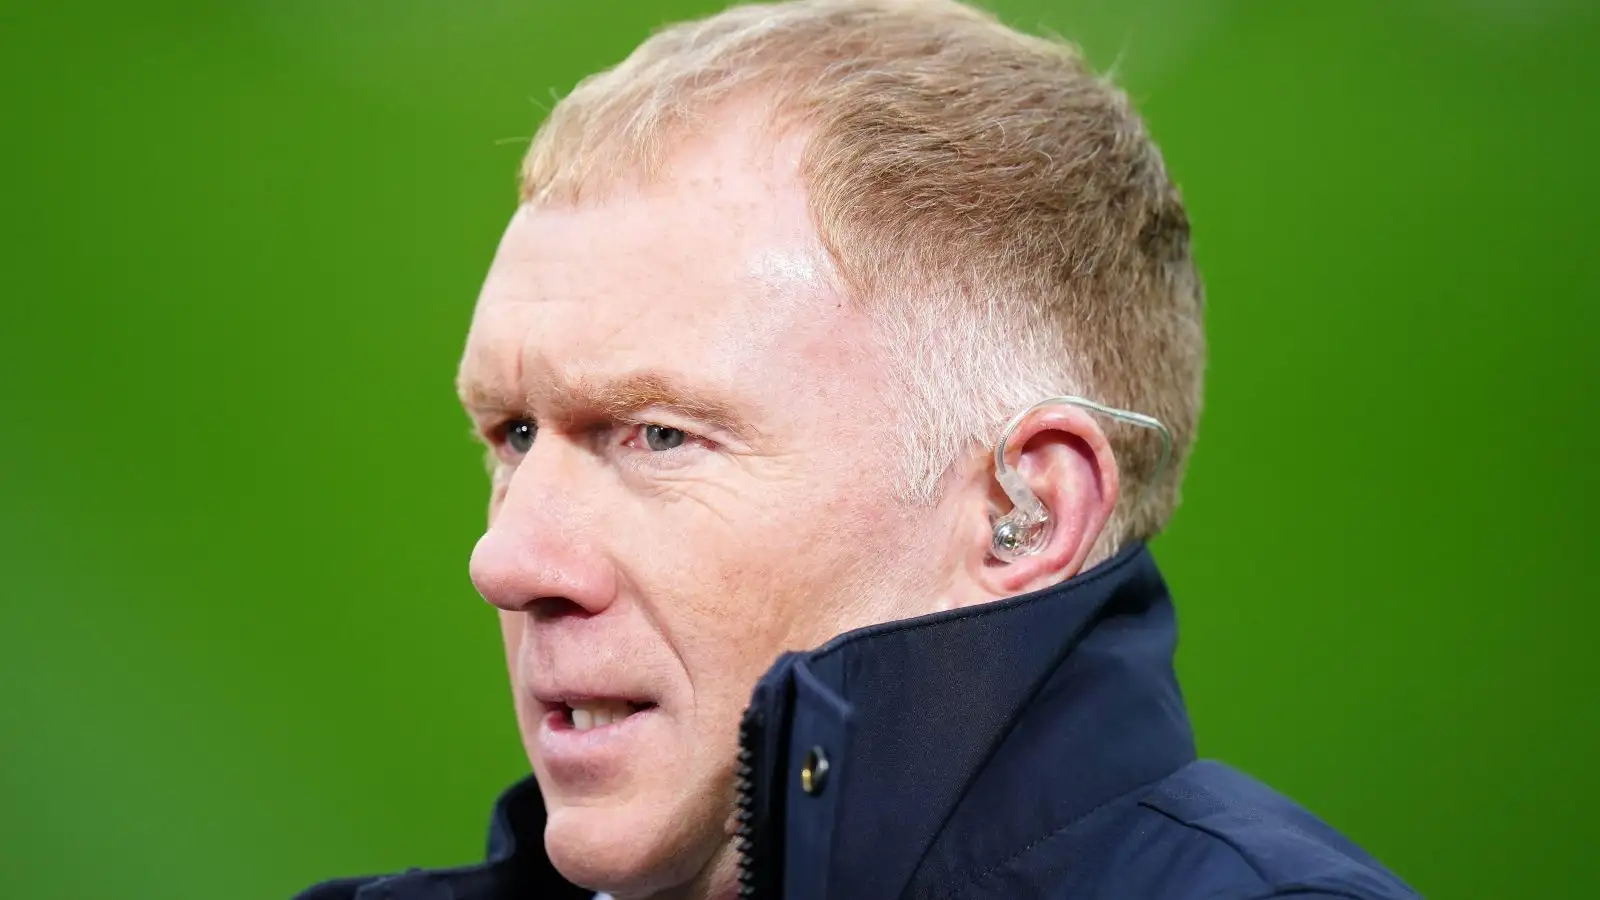 Scholes claims it would’ve been an ‘absolute disaster’ if he’d played with current Man Utd player